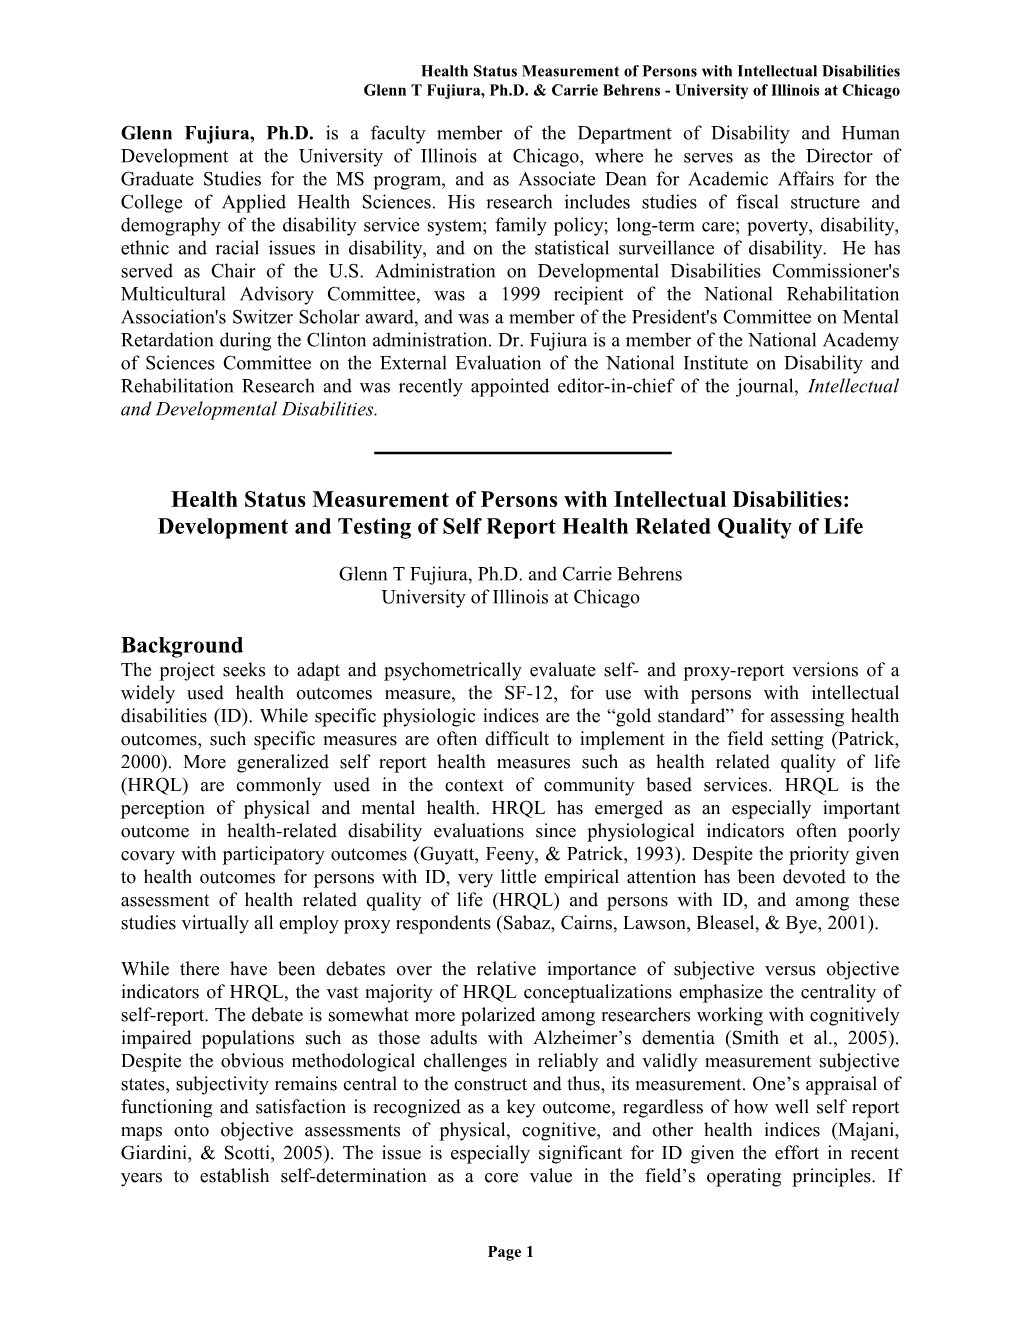 Health Status Measurement of Persons with Intellectual Disabilities: Development and Testing